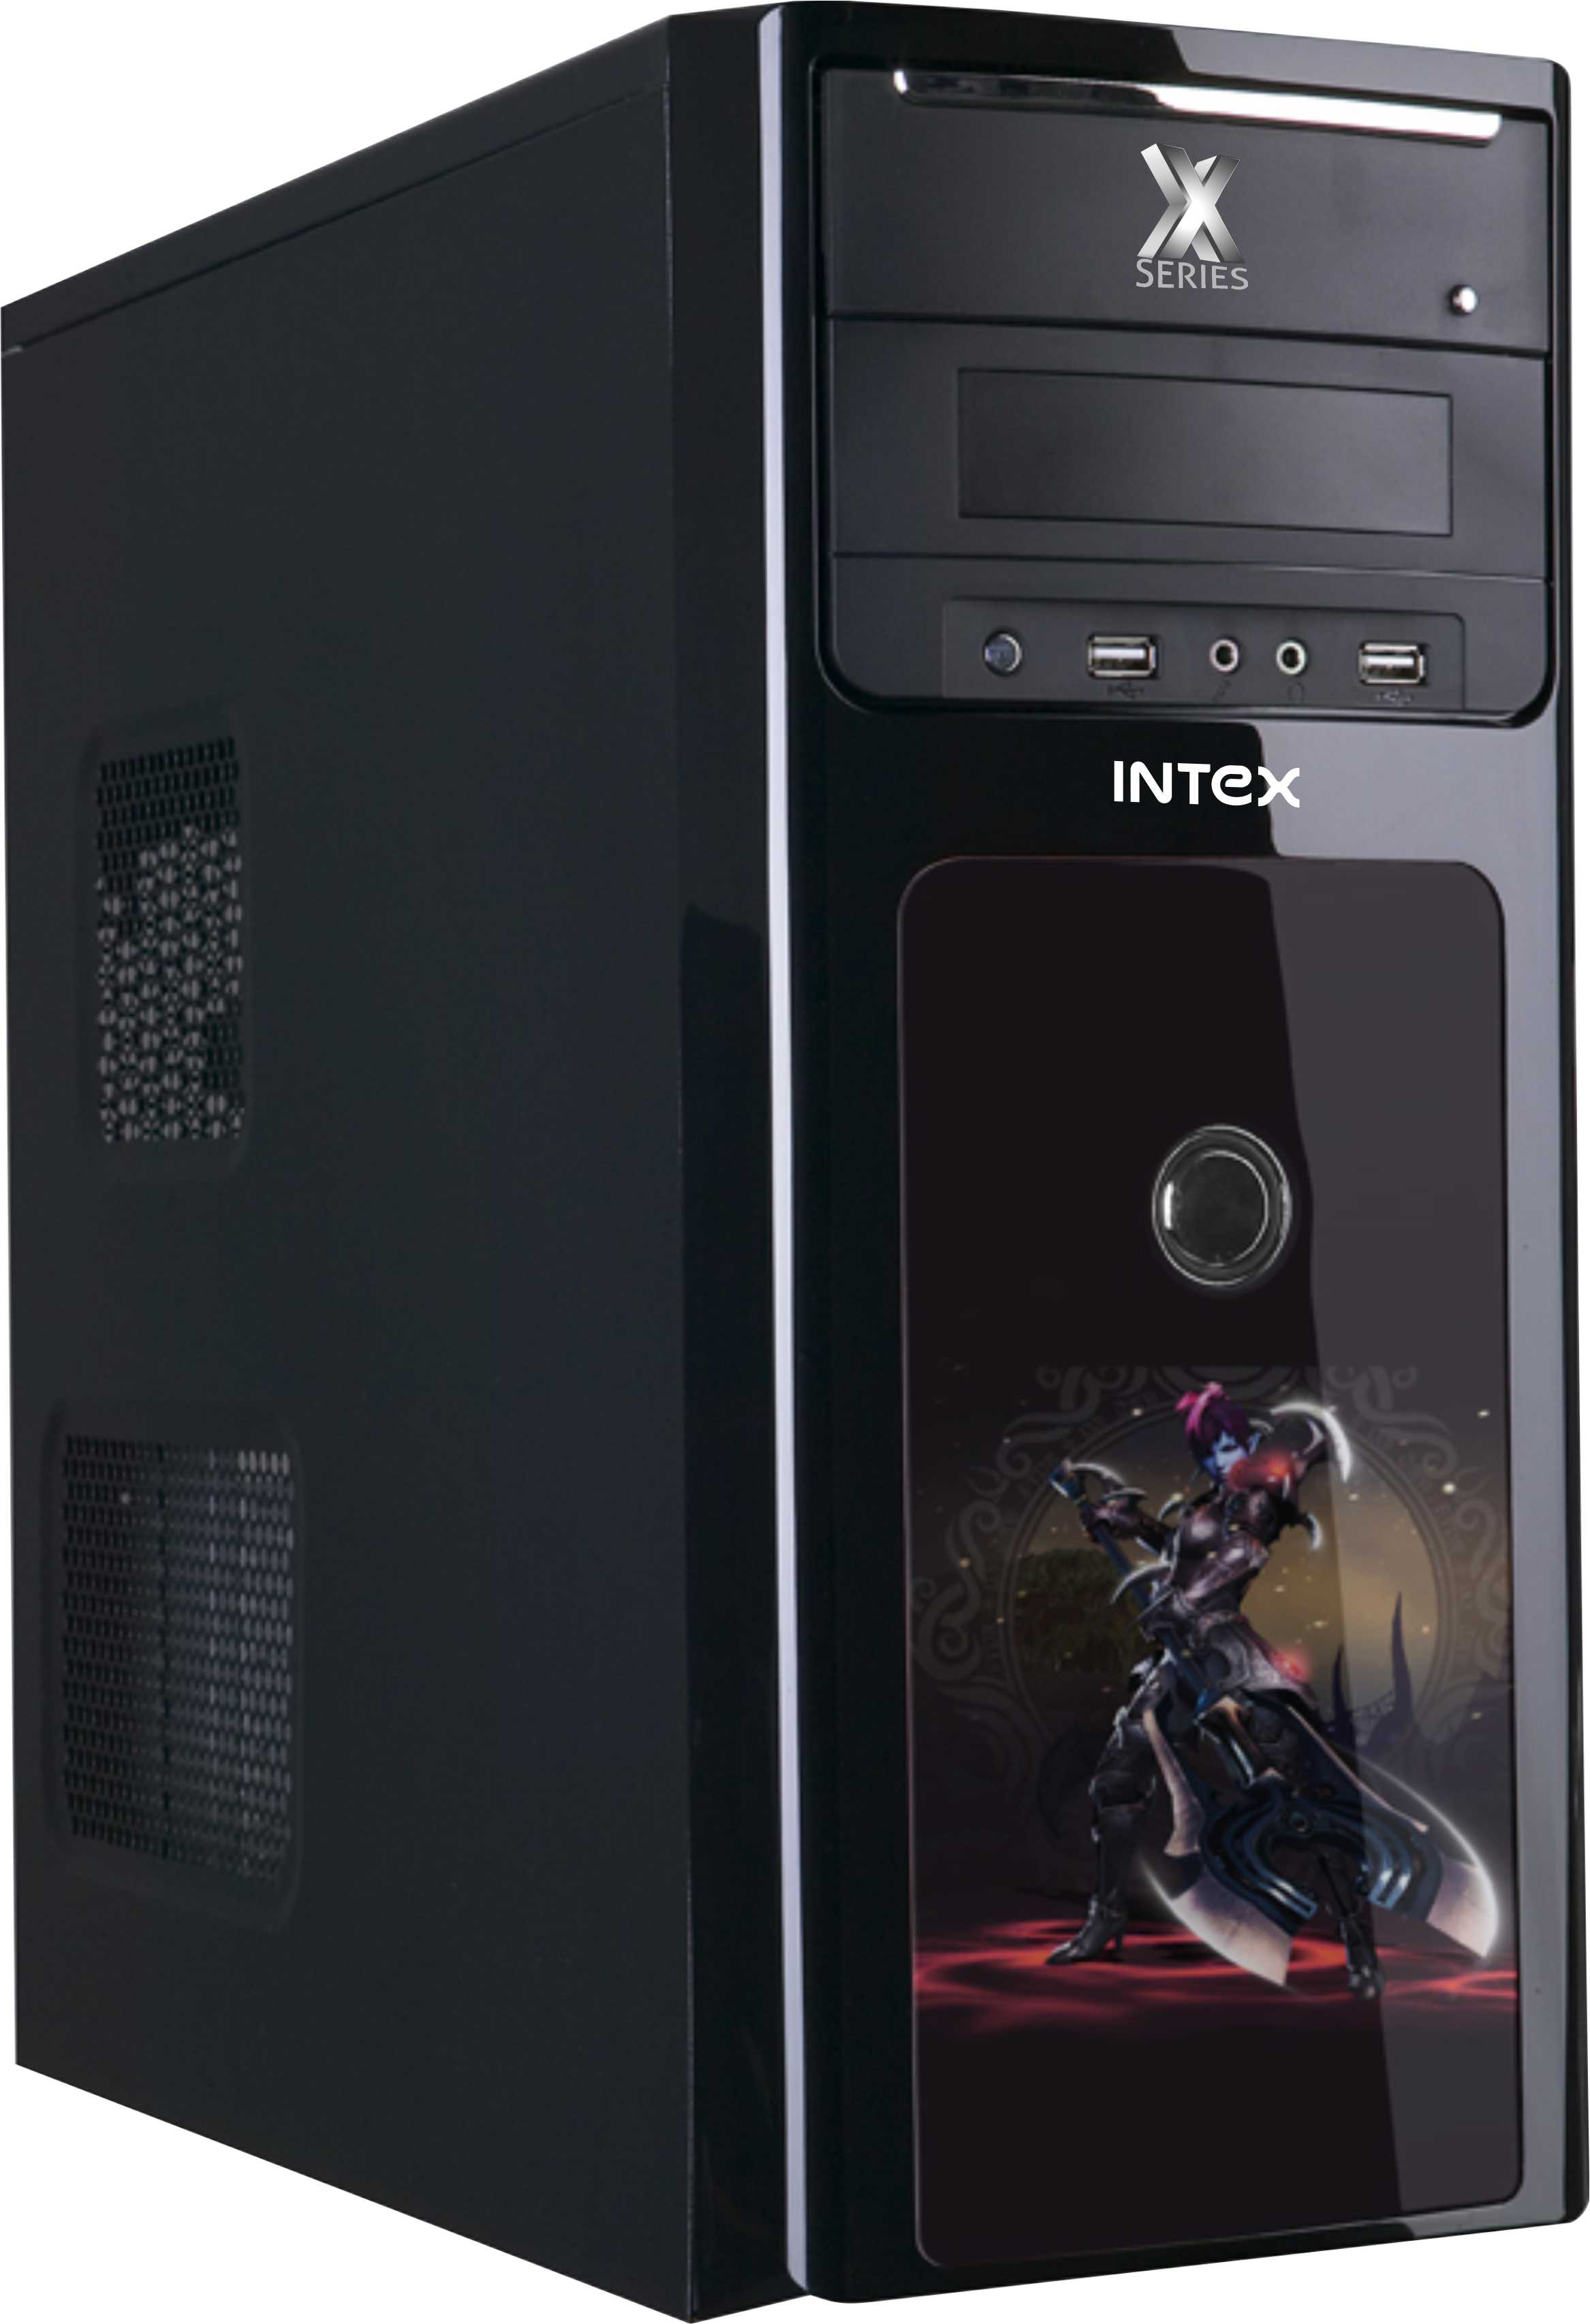 Latest Gadgets Reviews Intex Launches Stylish Cabinets For Pc